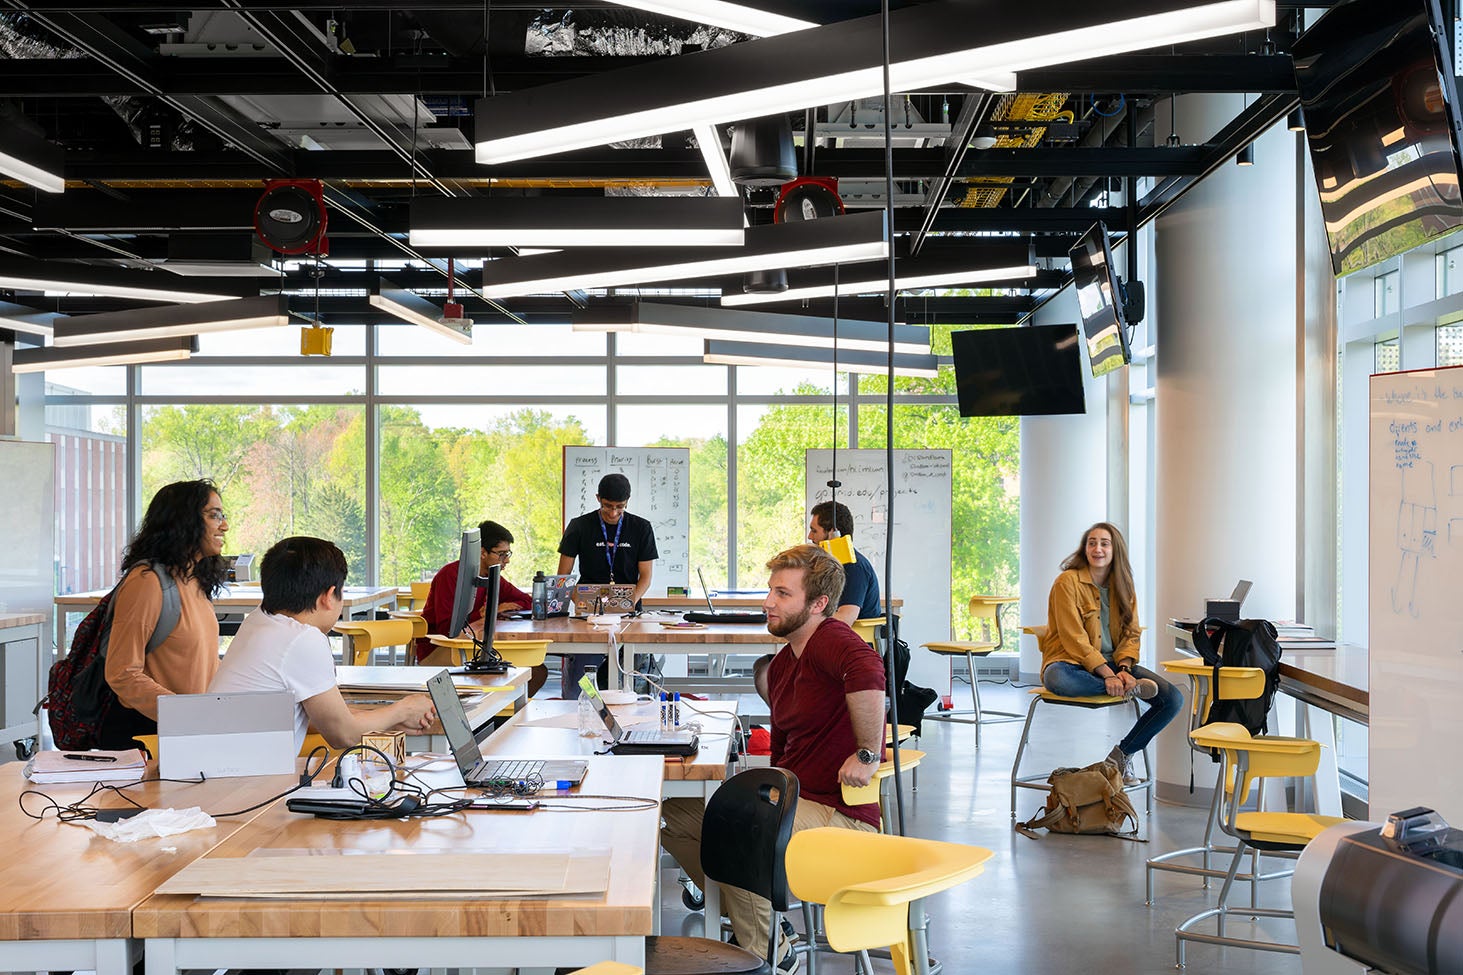 The makerspace at University of Maryland's Brendan Iribe Center